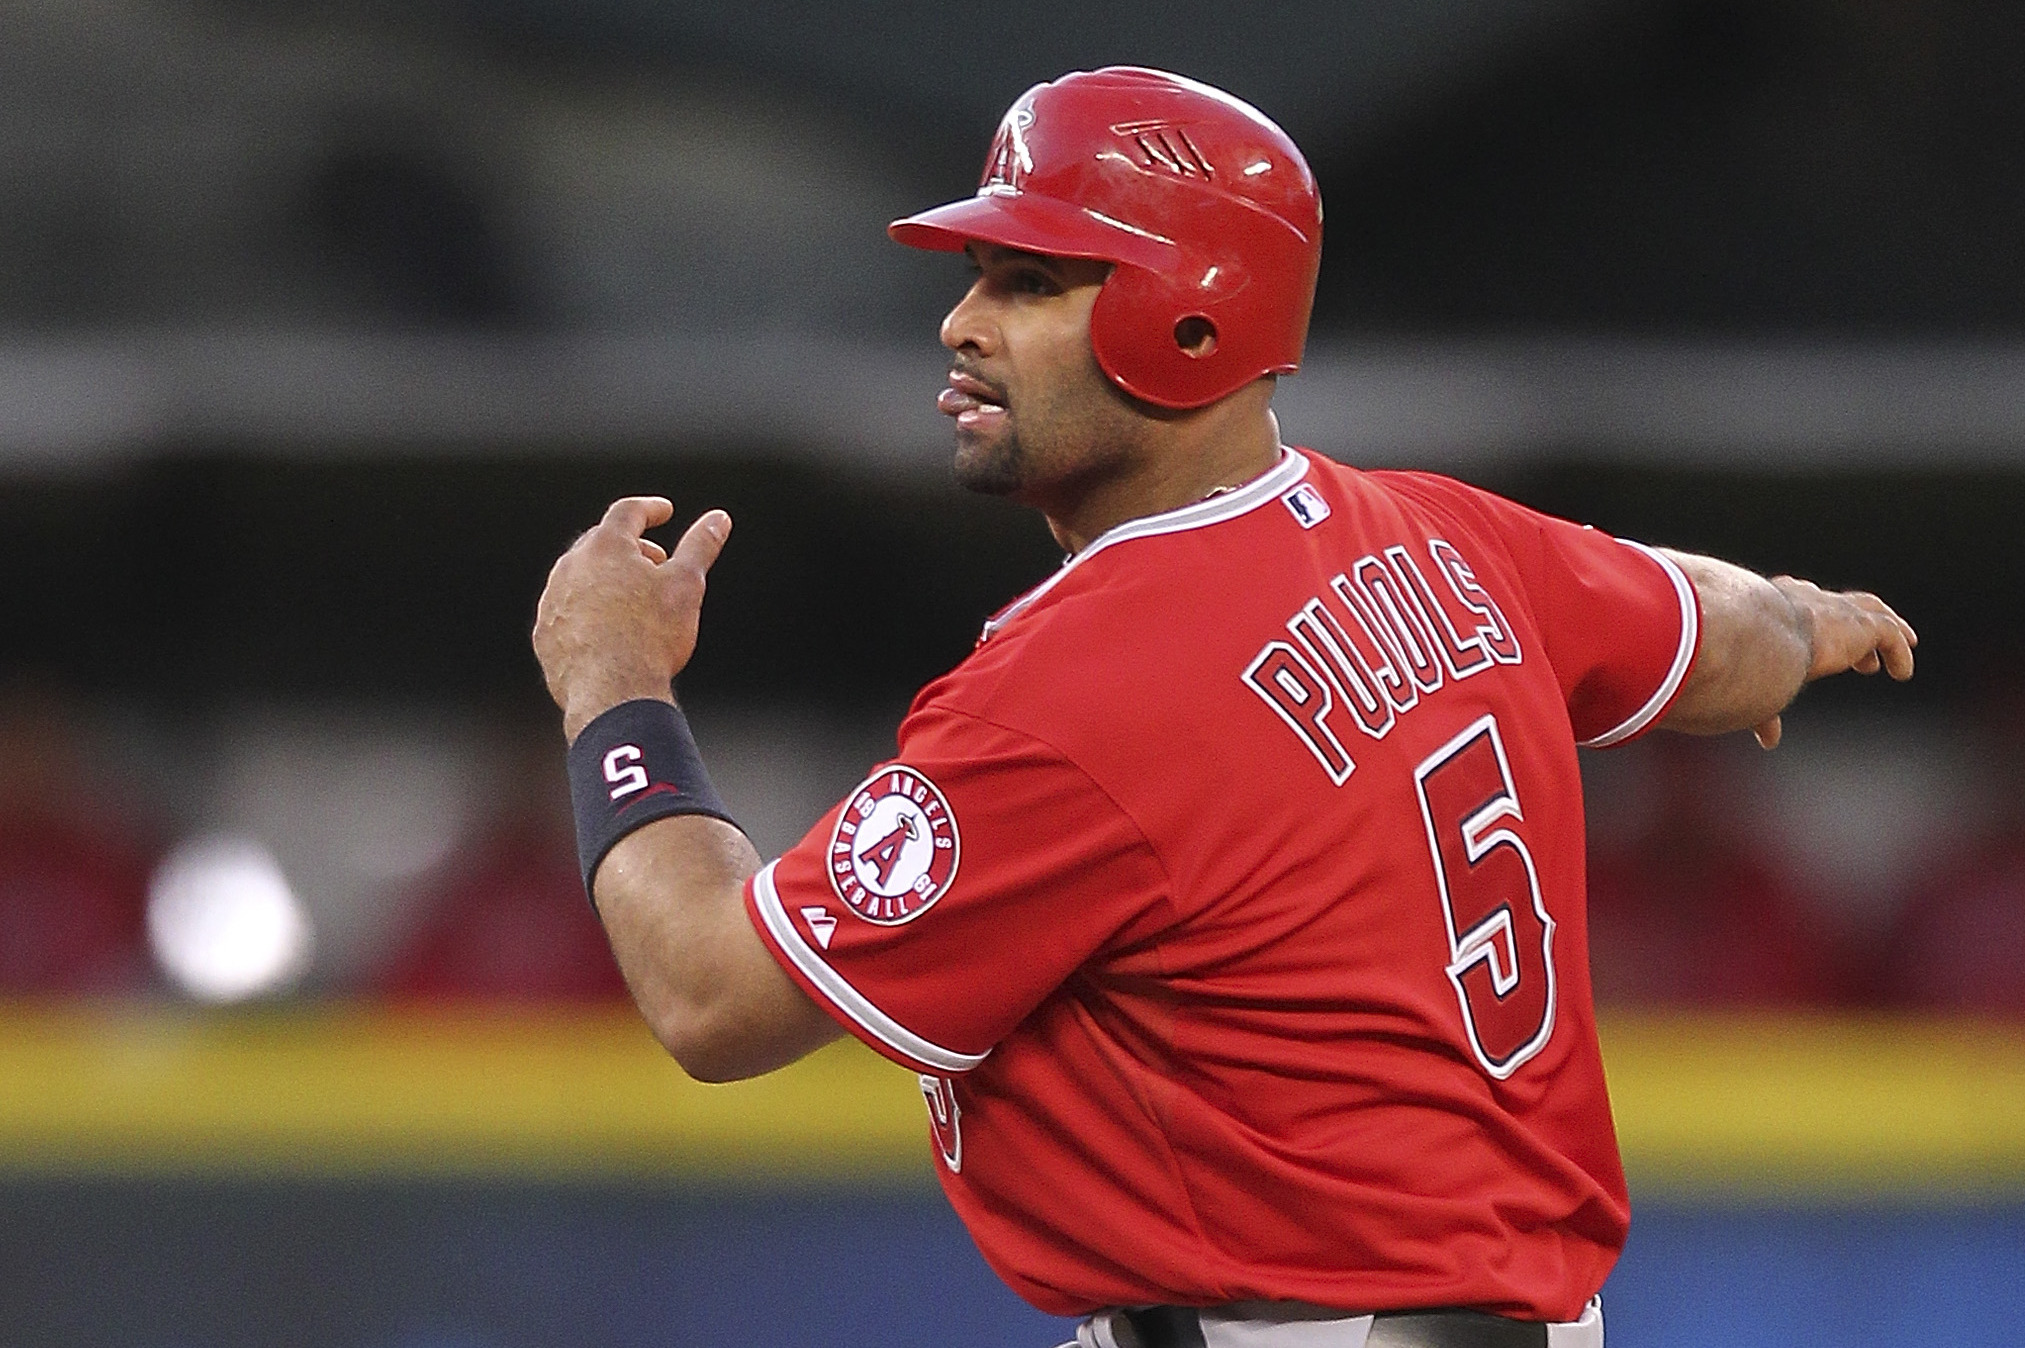 One of the greatest humans on and off the field, there will never be  another Albert Pujols 🇩🇴 #HispanicHeritageMonth